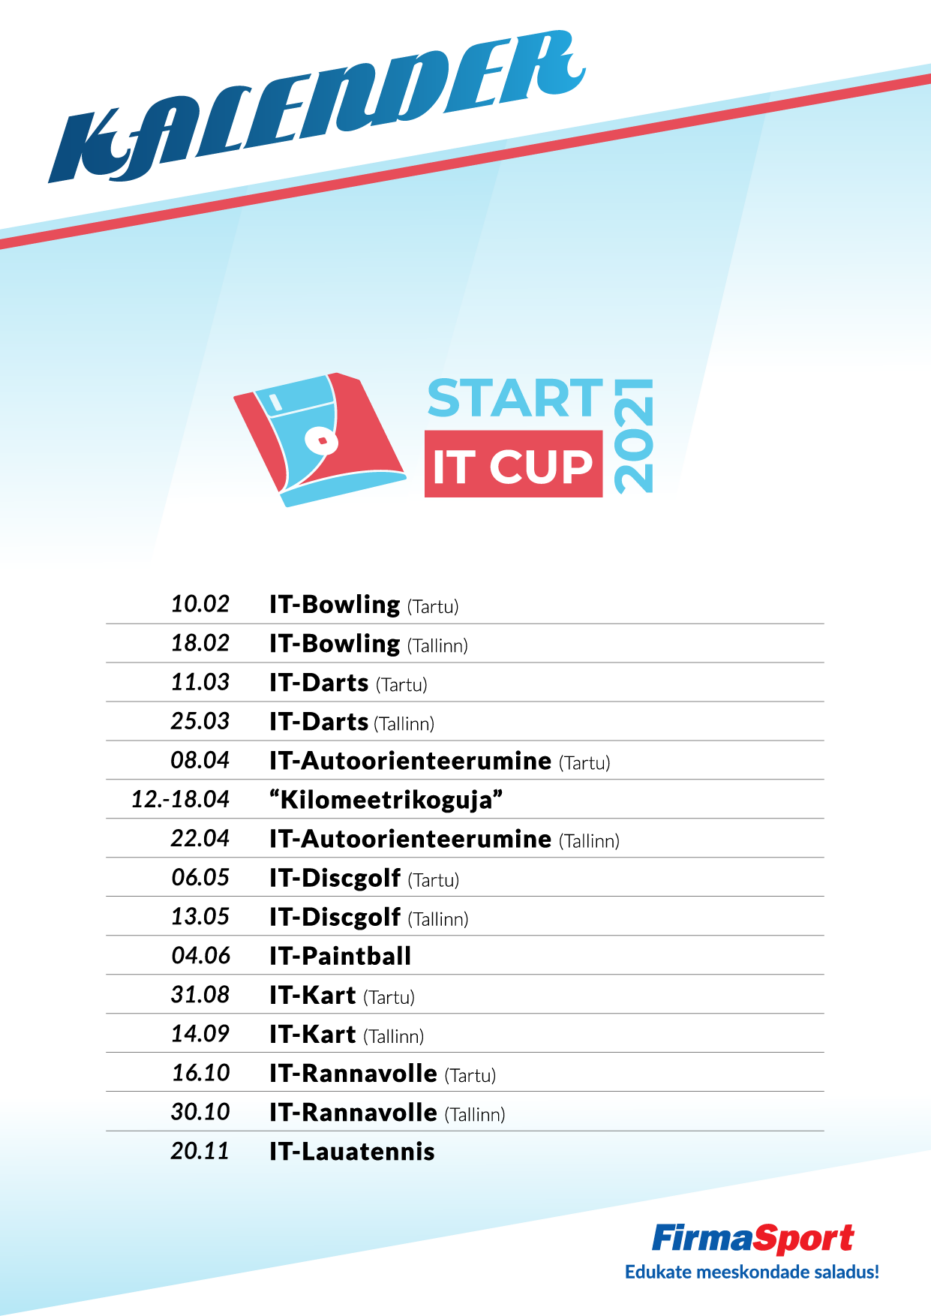 Start IT CUP 2021 png